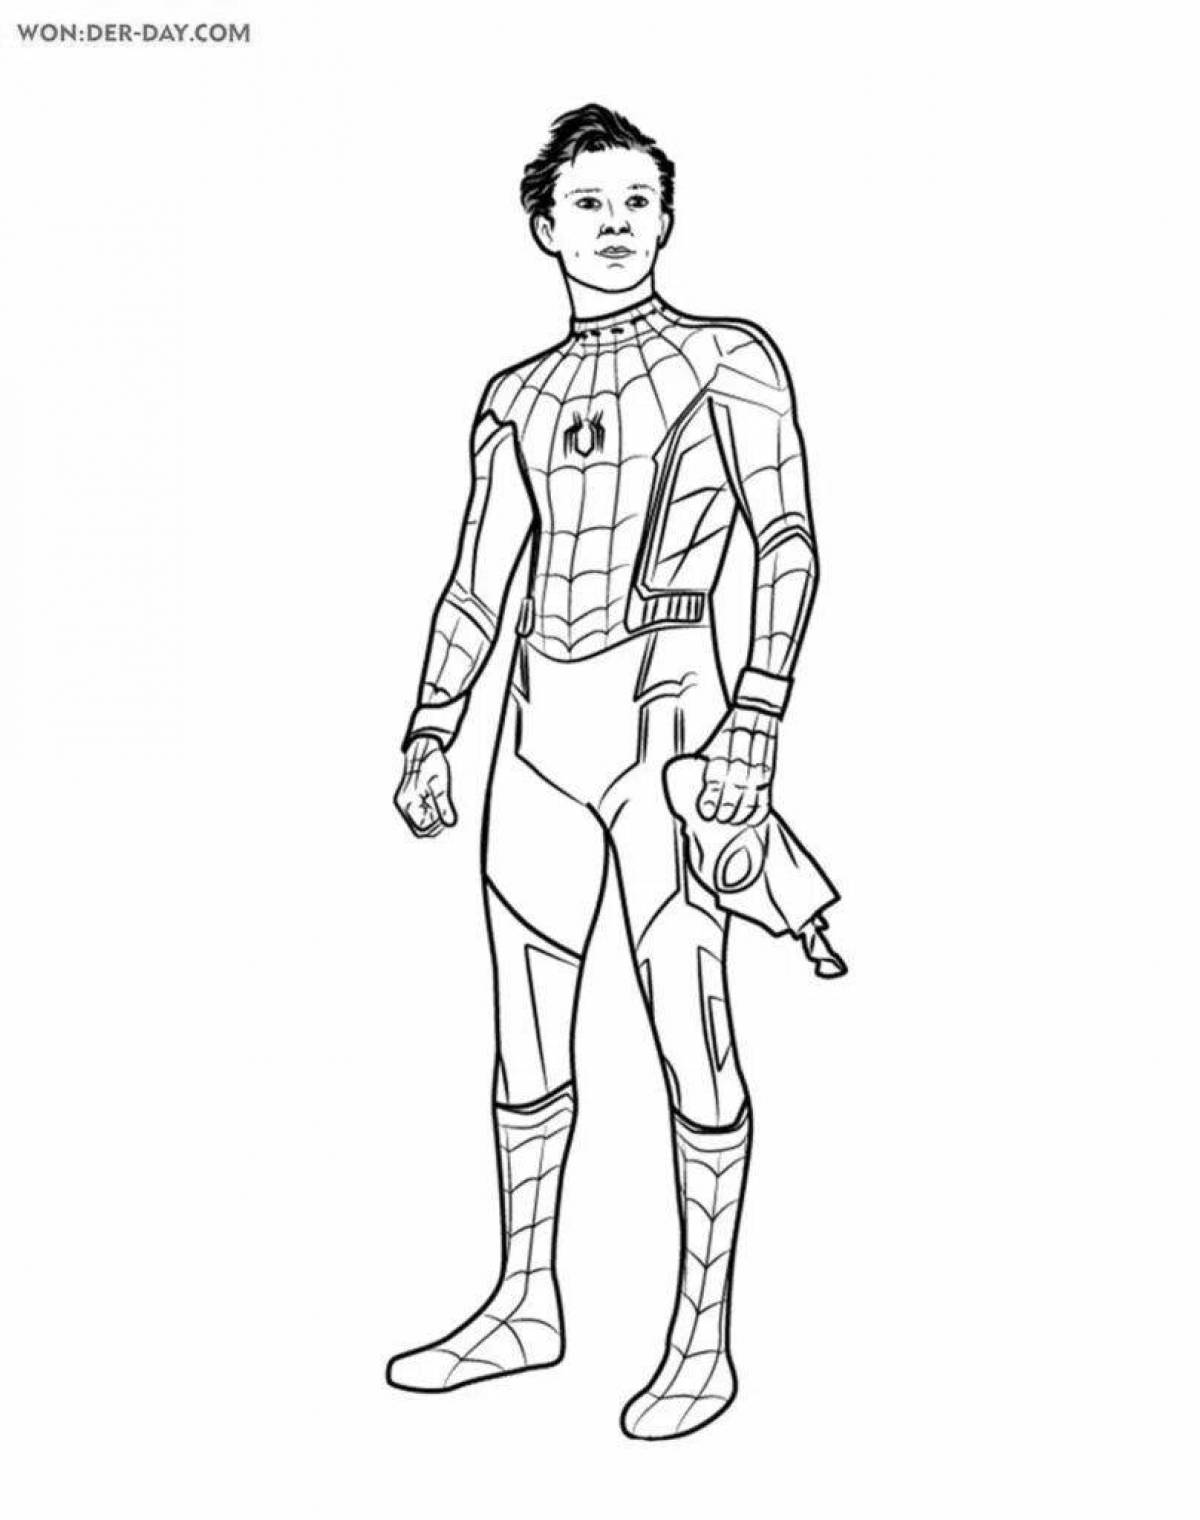 Peter parker's amazing spiderman coloring book